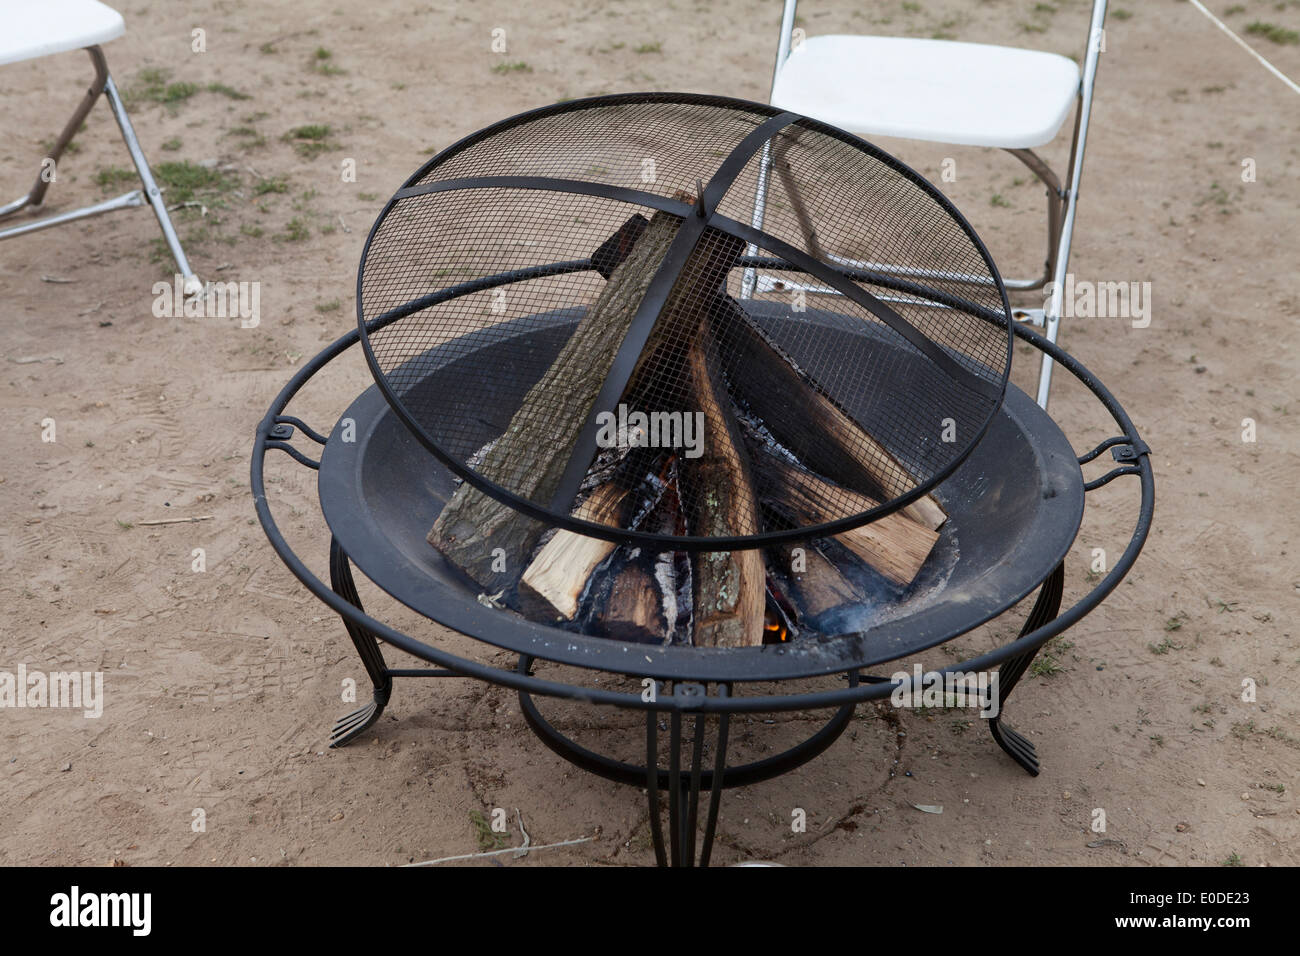 Portable outdoor fire pit Foto Stock